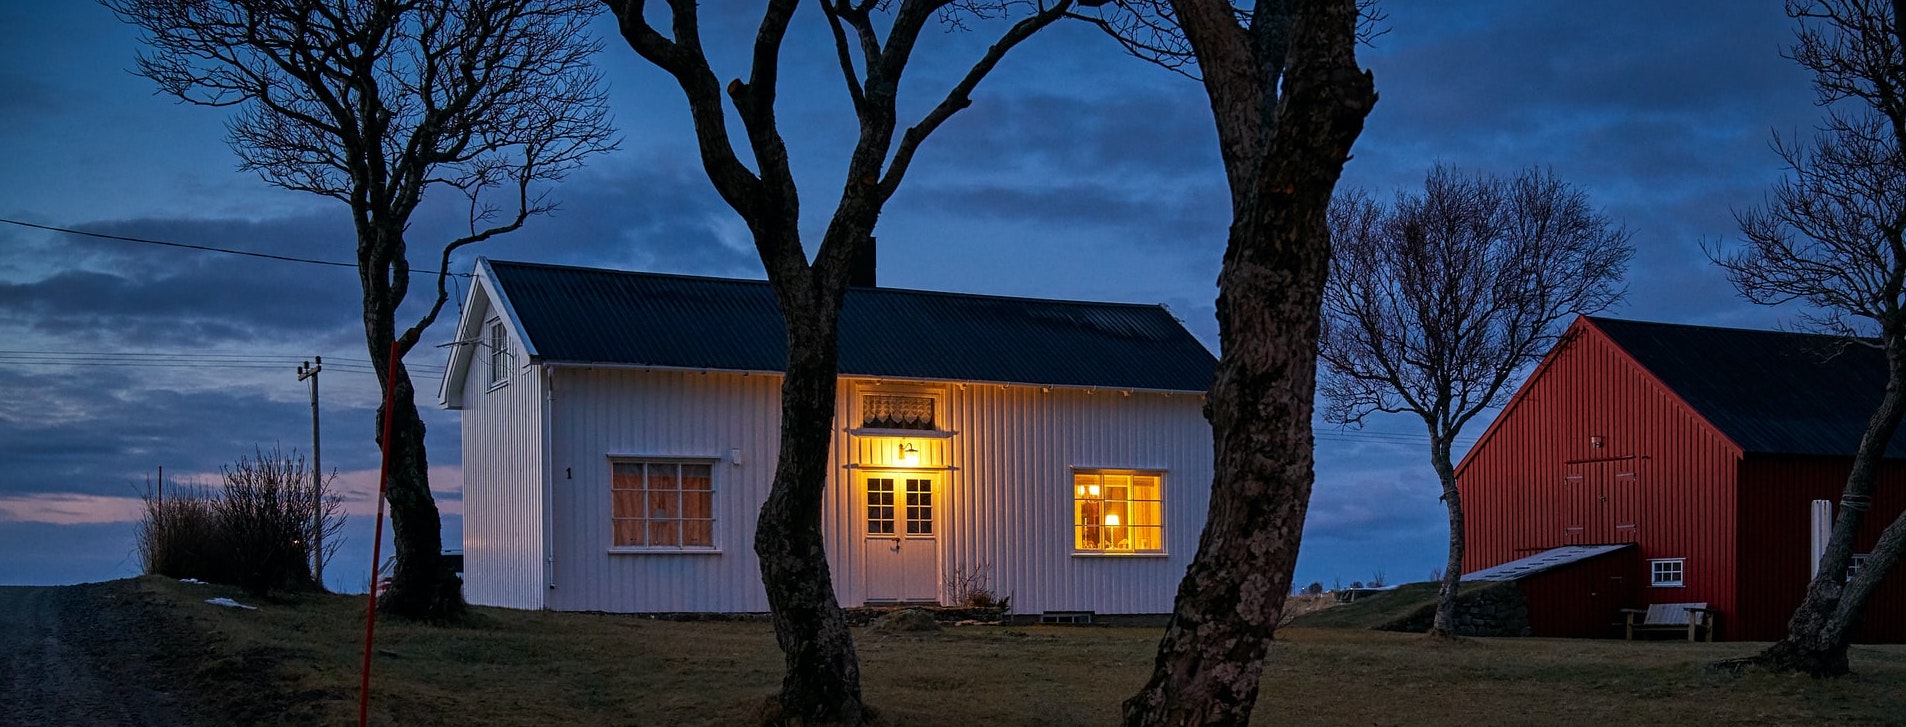 night view of farm house